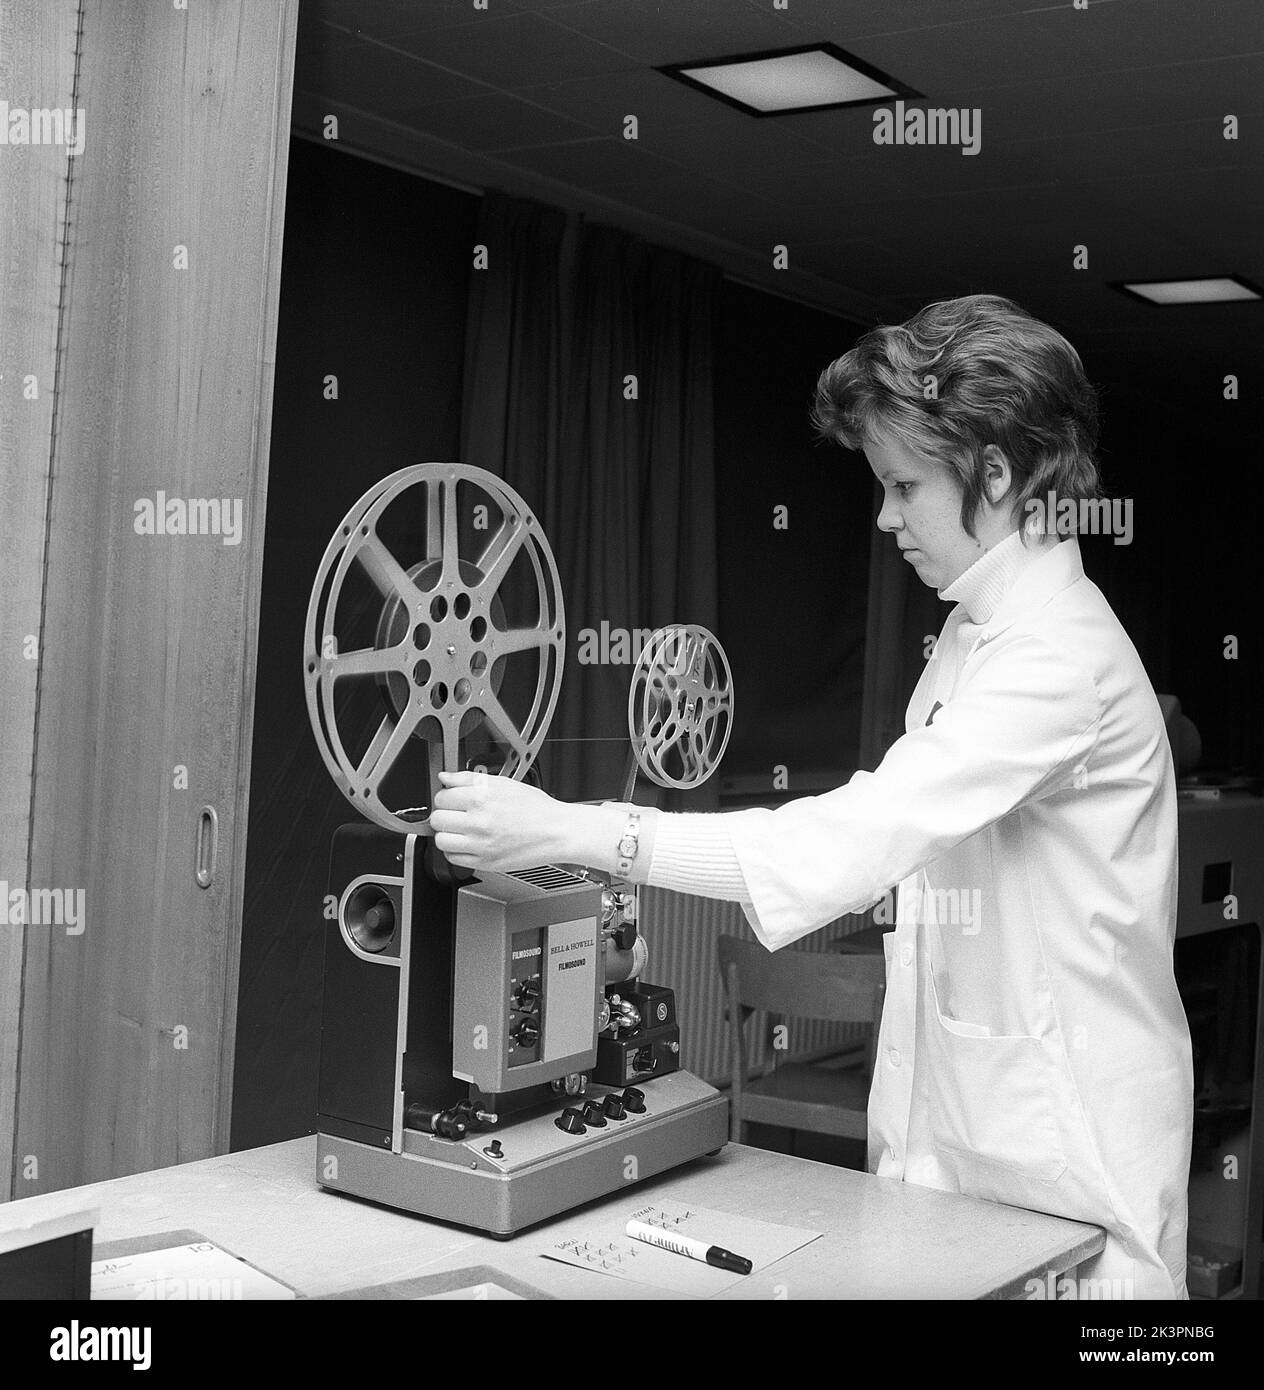 In the 1960s. A young female teacher with a film projector, mounting the film roll. Sometimes short films were shown in the classroom or in a special viewing room, not only for educational puroposes but for entertainment. The film had sound. Once the film roll was viewed, the film was rolled onto a reciever roll and needed to be winded back. Sweden 1968 ref CV77 Stock Photo